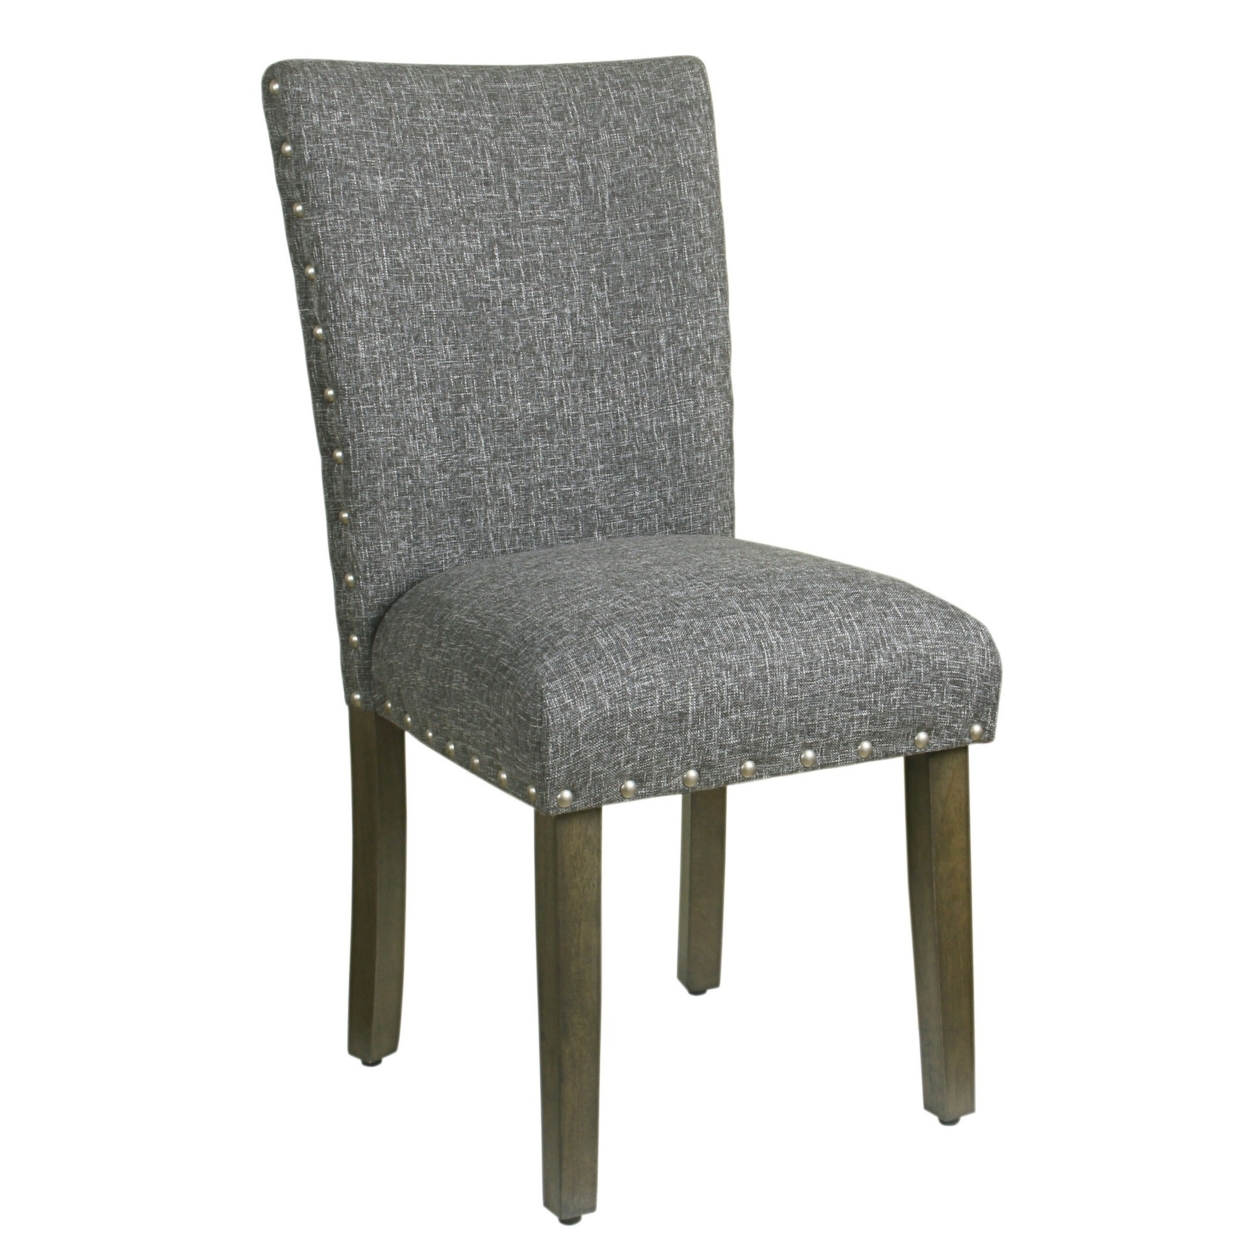 Fabric Upholstered Wooden Parson Chair With Nail Head Trim Accent, Dark Gray, Set Of Two- Saltoro Sherpi